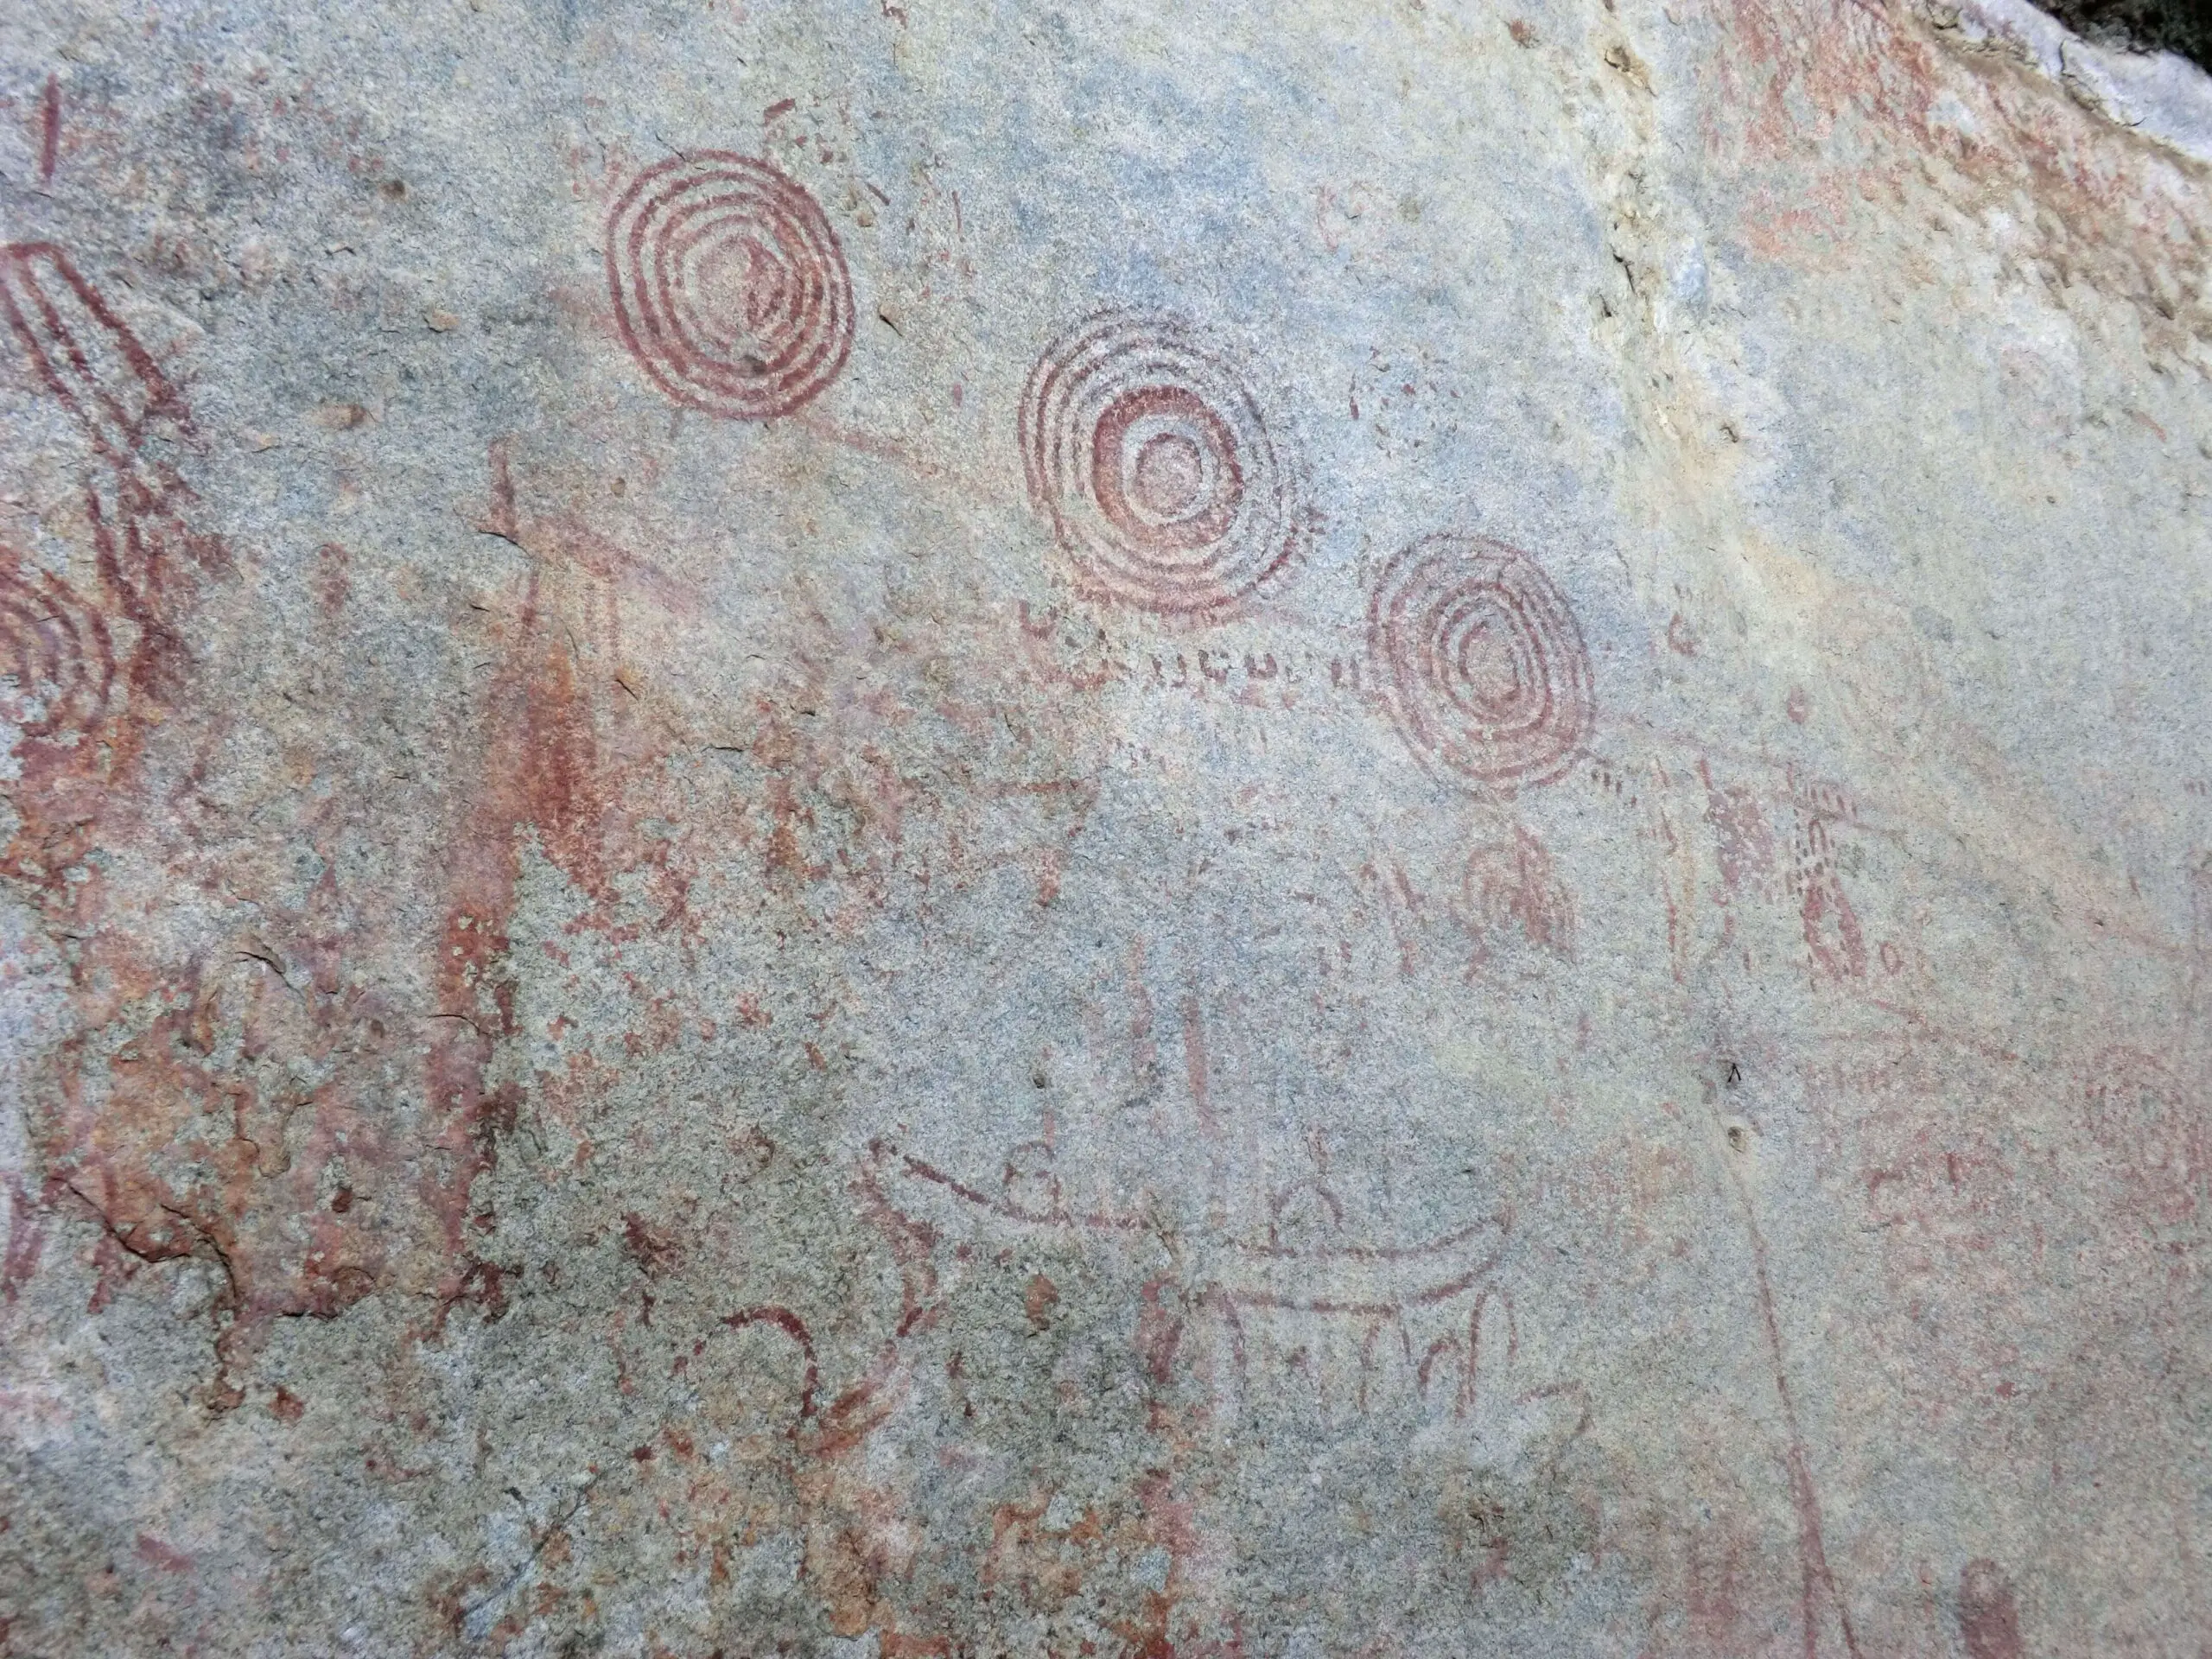 A wall full of red-painted pictographs of figures and concentric circles